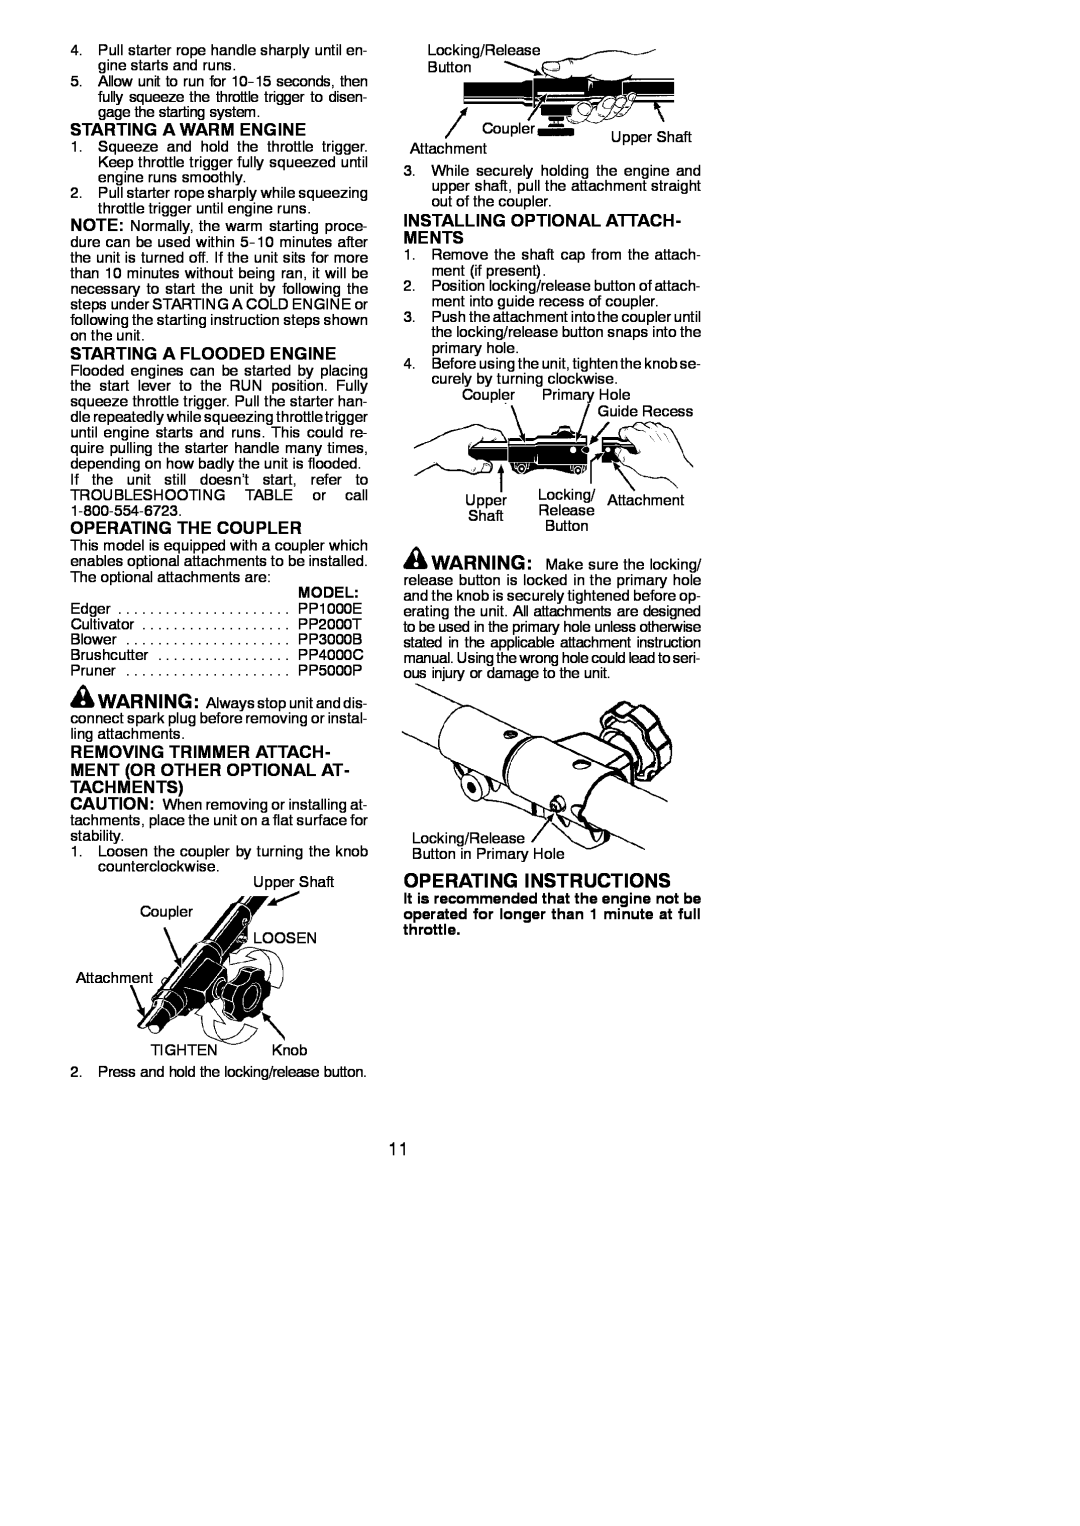 Poulan 545177327 Operating Instructions, Starting A Warm Engine, Starting A Flooded Engine, Operating The Coupler, Model 